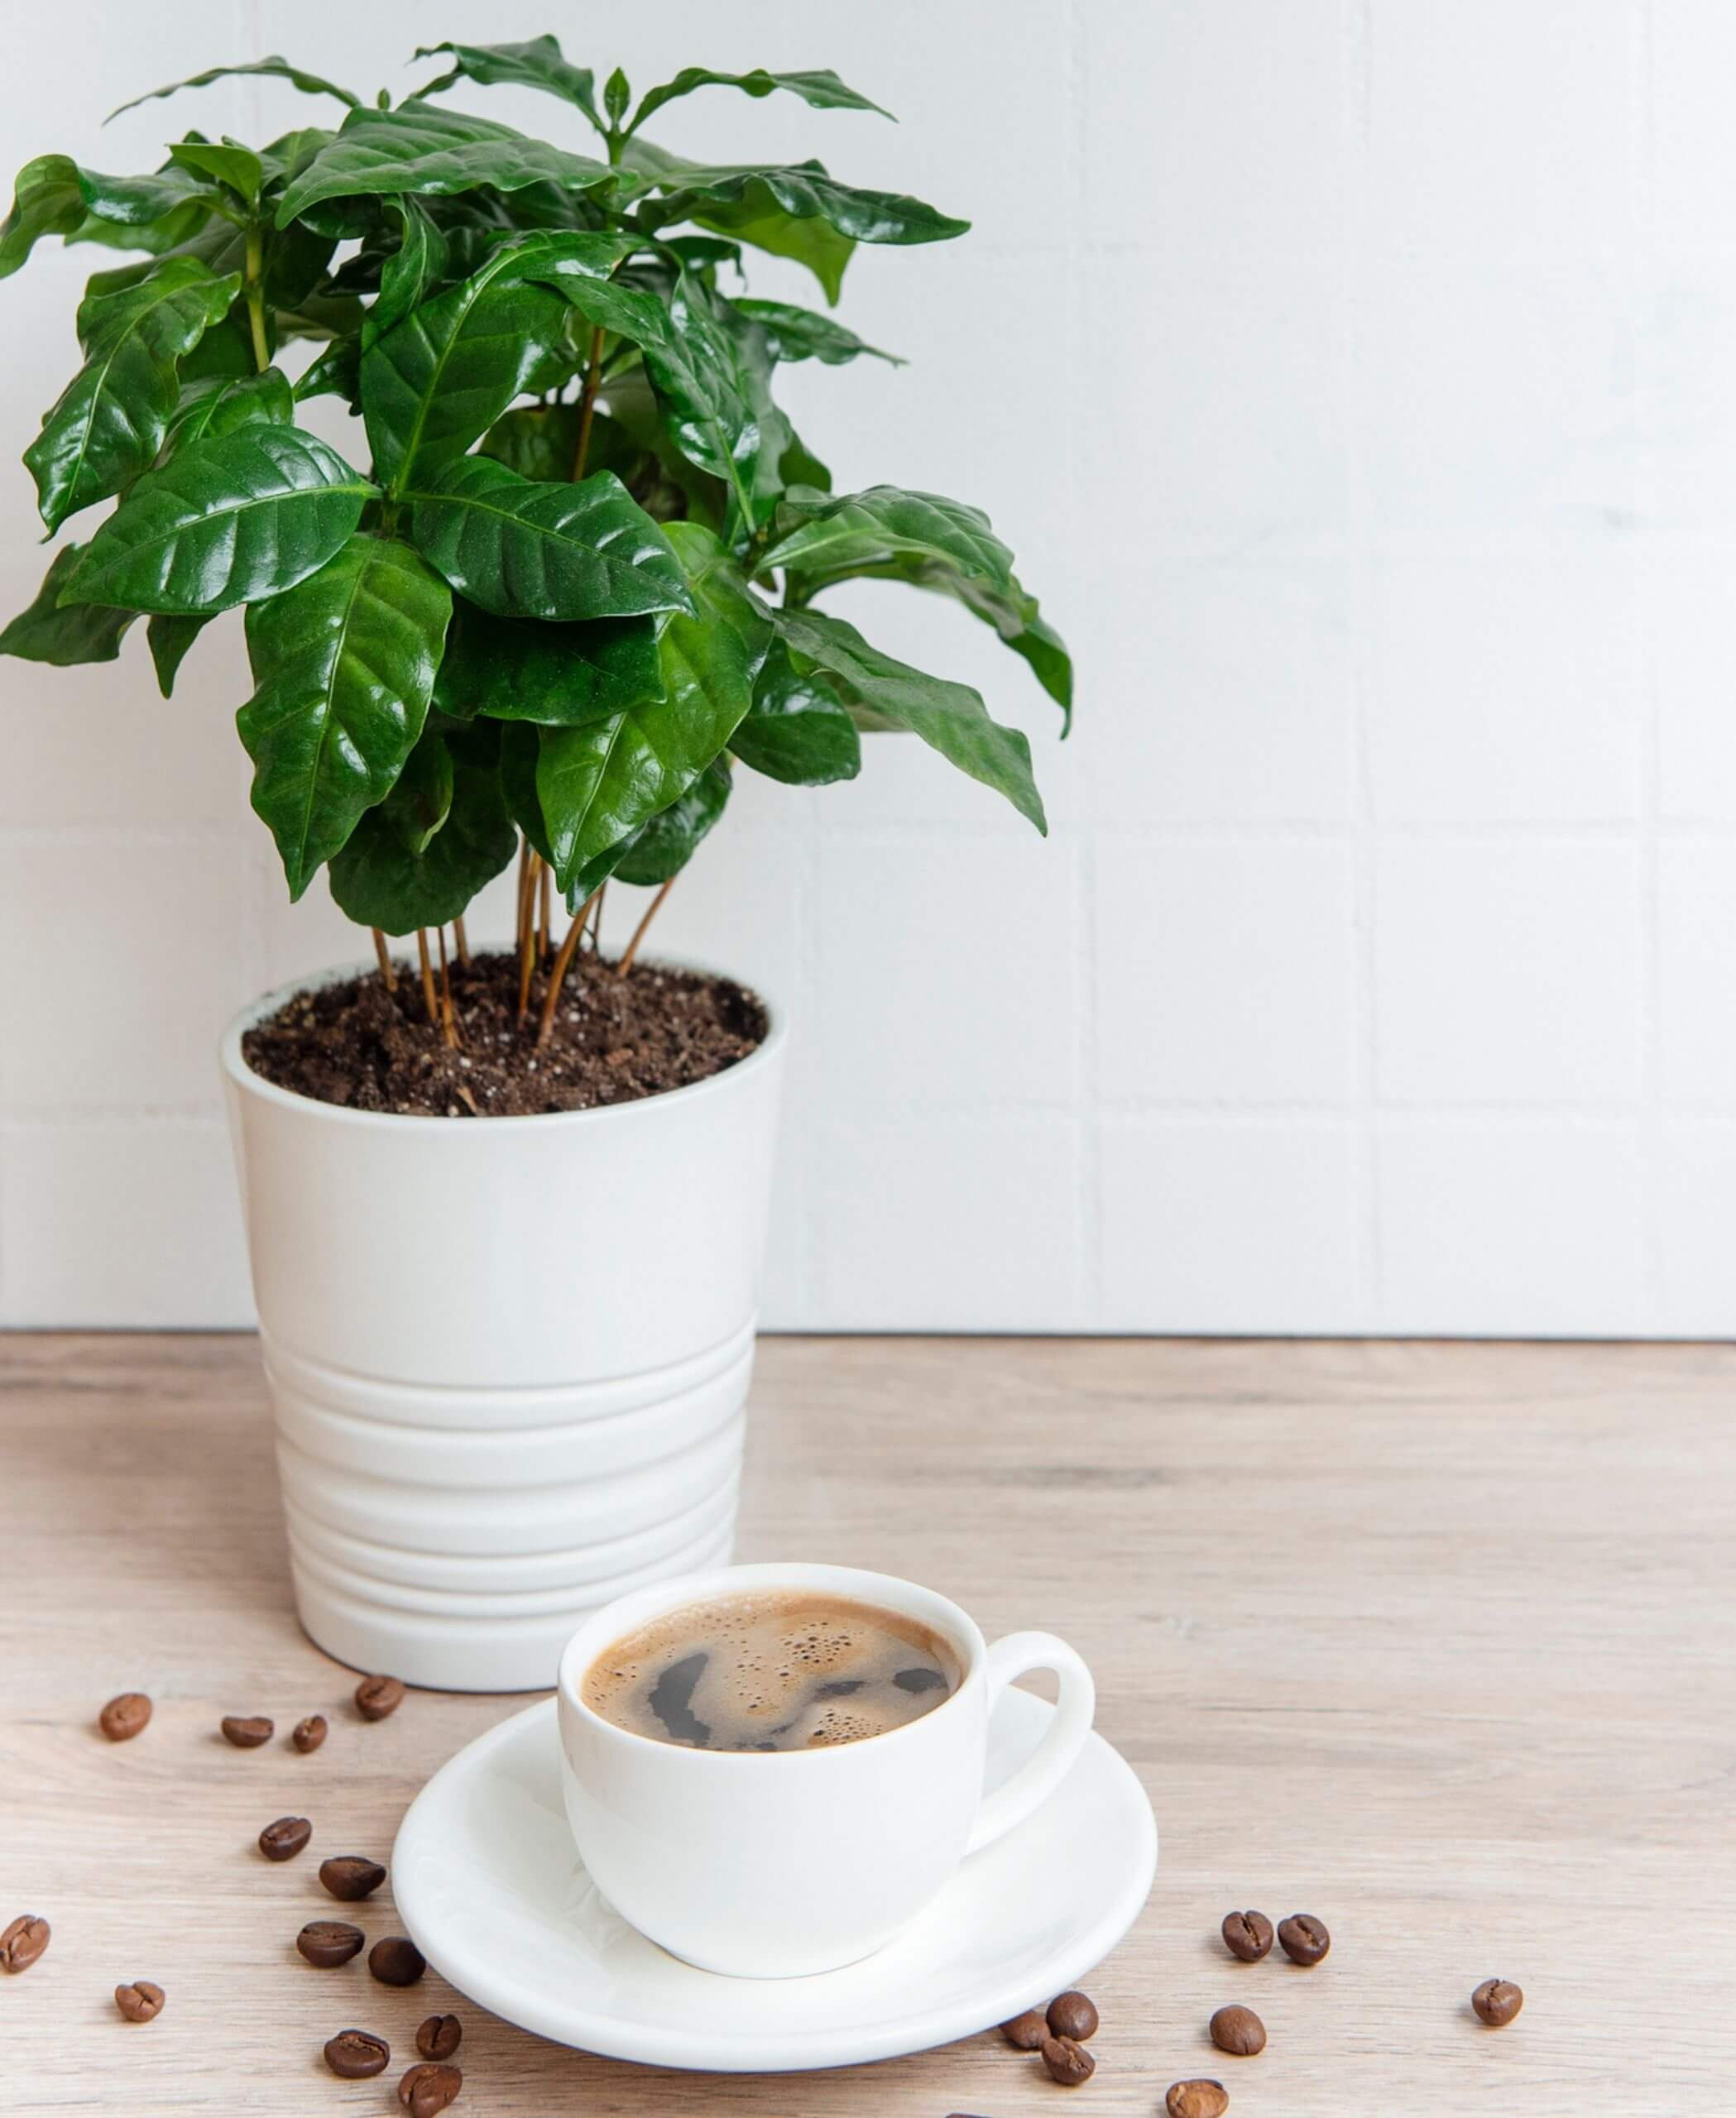 coffee plant 101: how to care for coffee plants | bloomscape